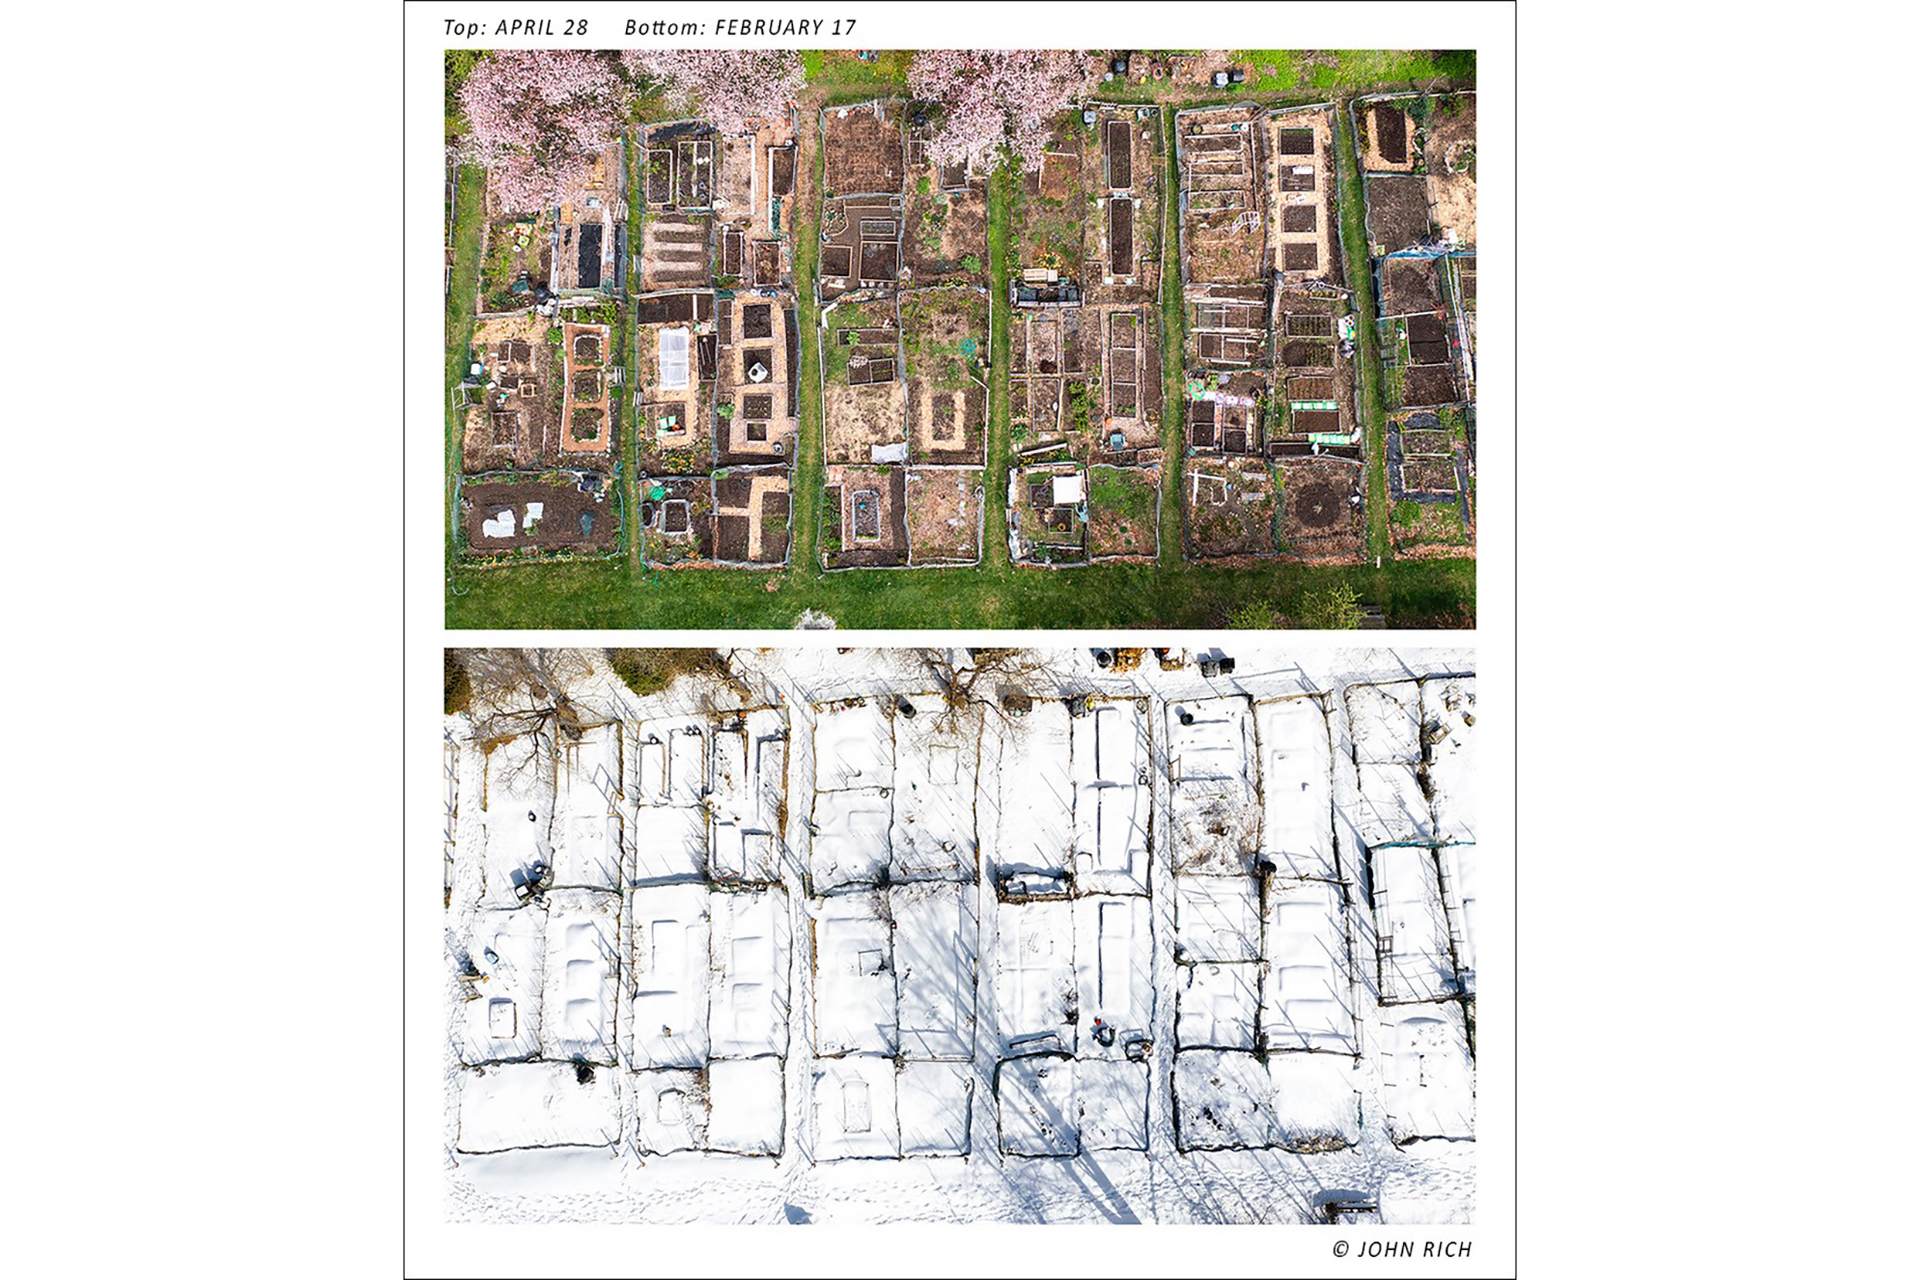 Two pictures of community gardens from a drone, the top taken on April 28 and the bottom on February 17